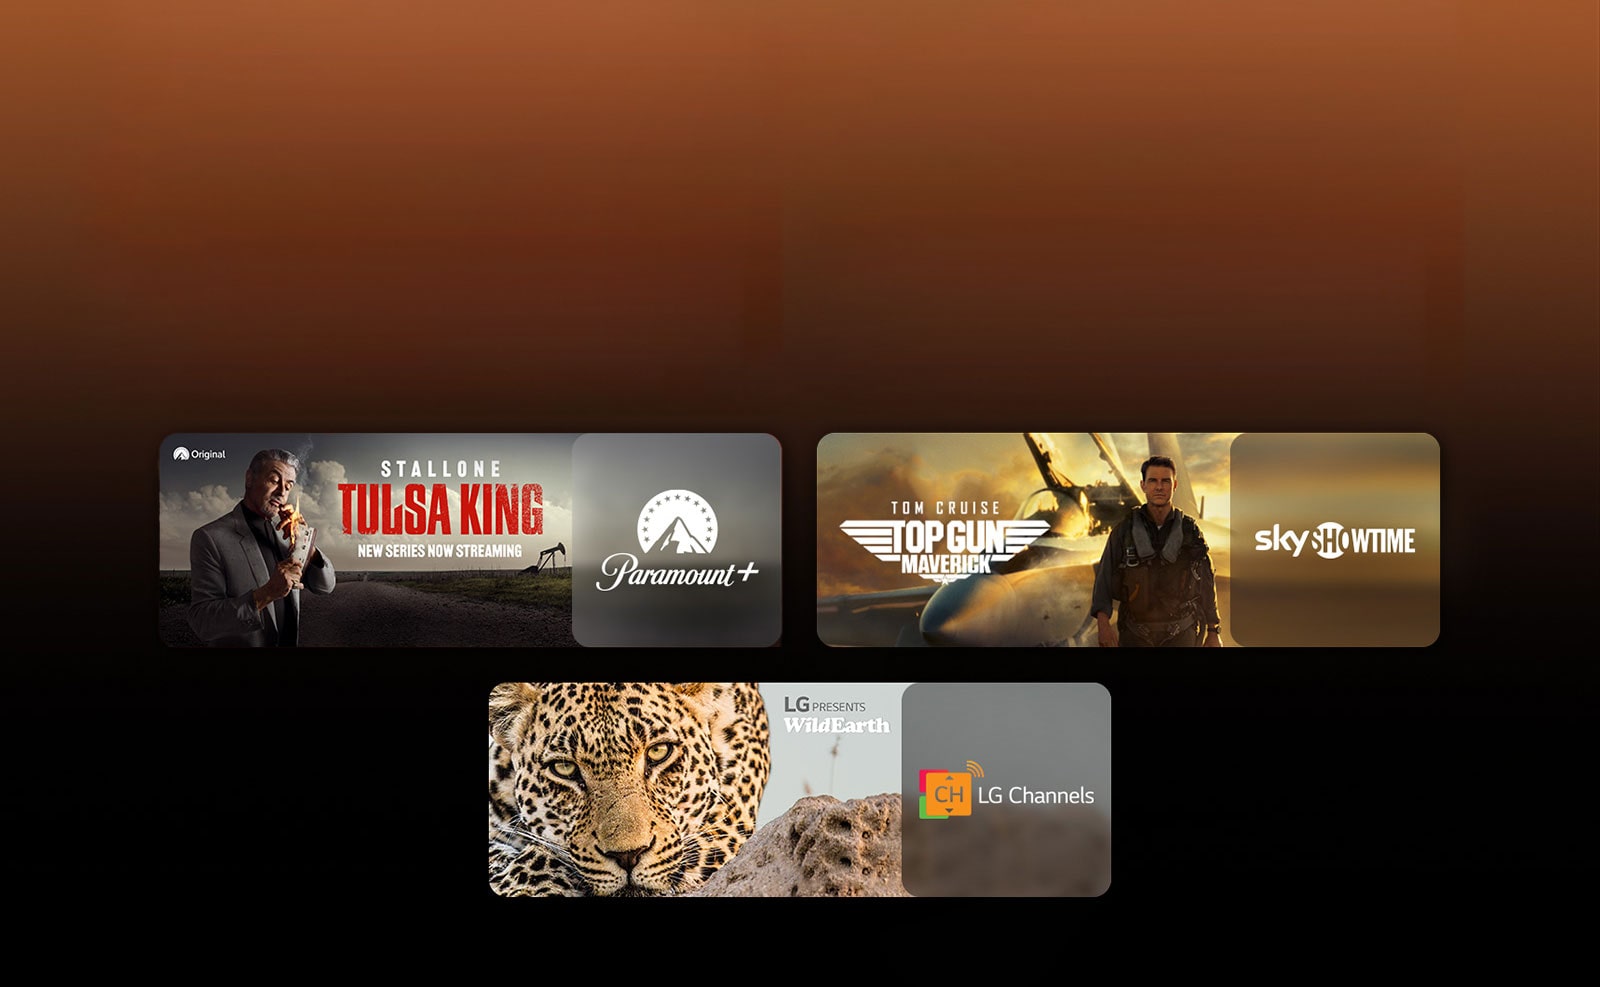 There are logos of streaming service platforms and matching footages right next to each logo. There are images of Paramount+, Skyshowtime, andLG Channel The rings of power.